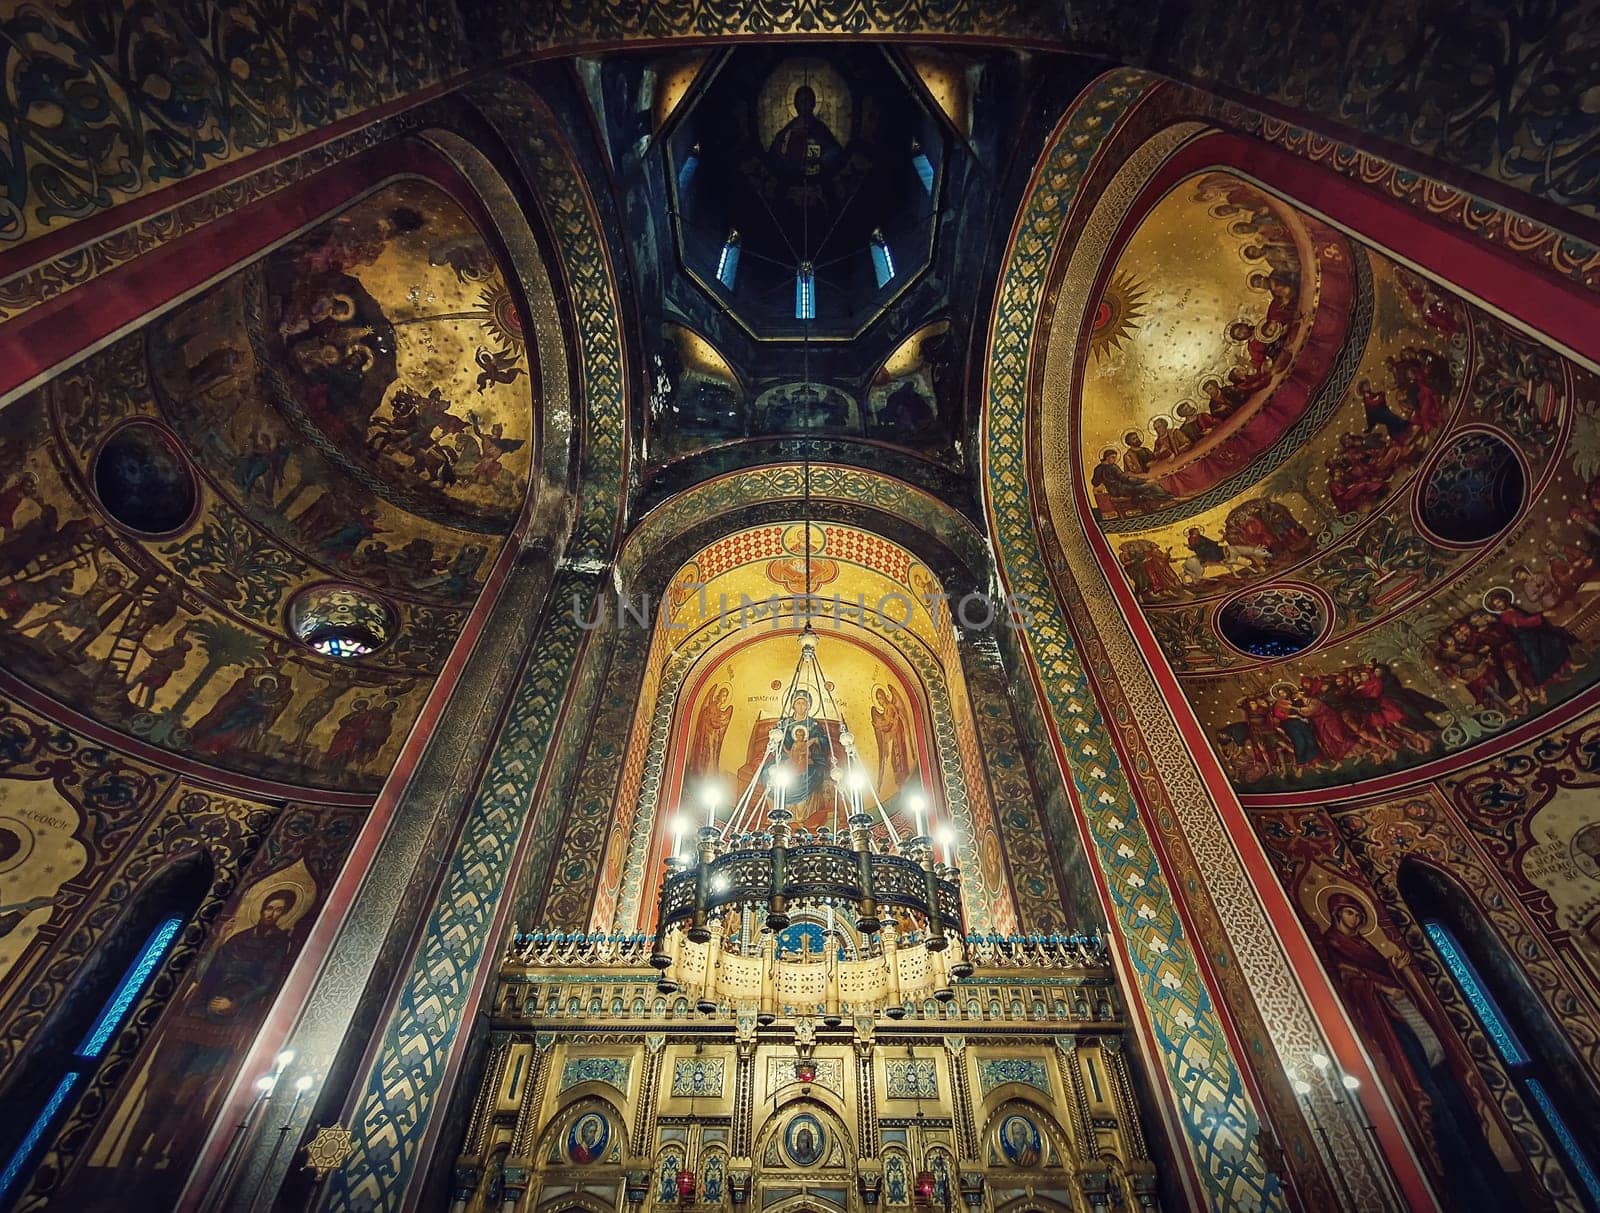 Interior architectural details of the Curtea de Arges monastery. The tall hall with painted icons, the golden altar and a chandelier with lights suspending out of ceiling